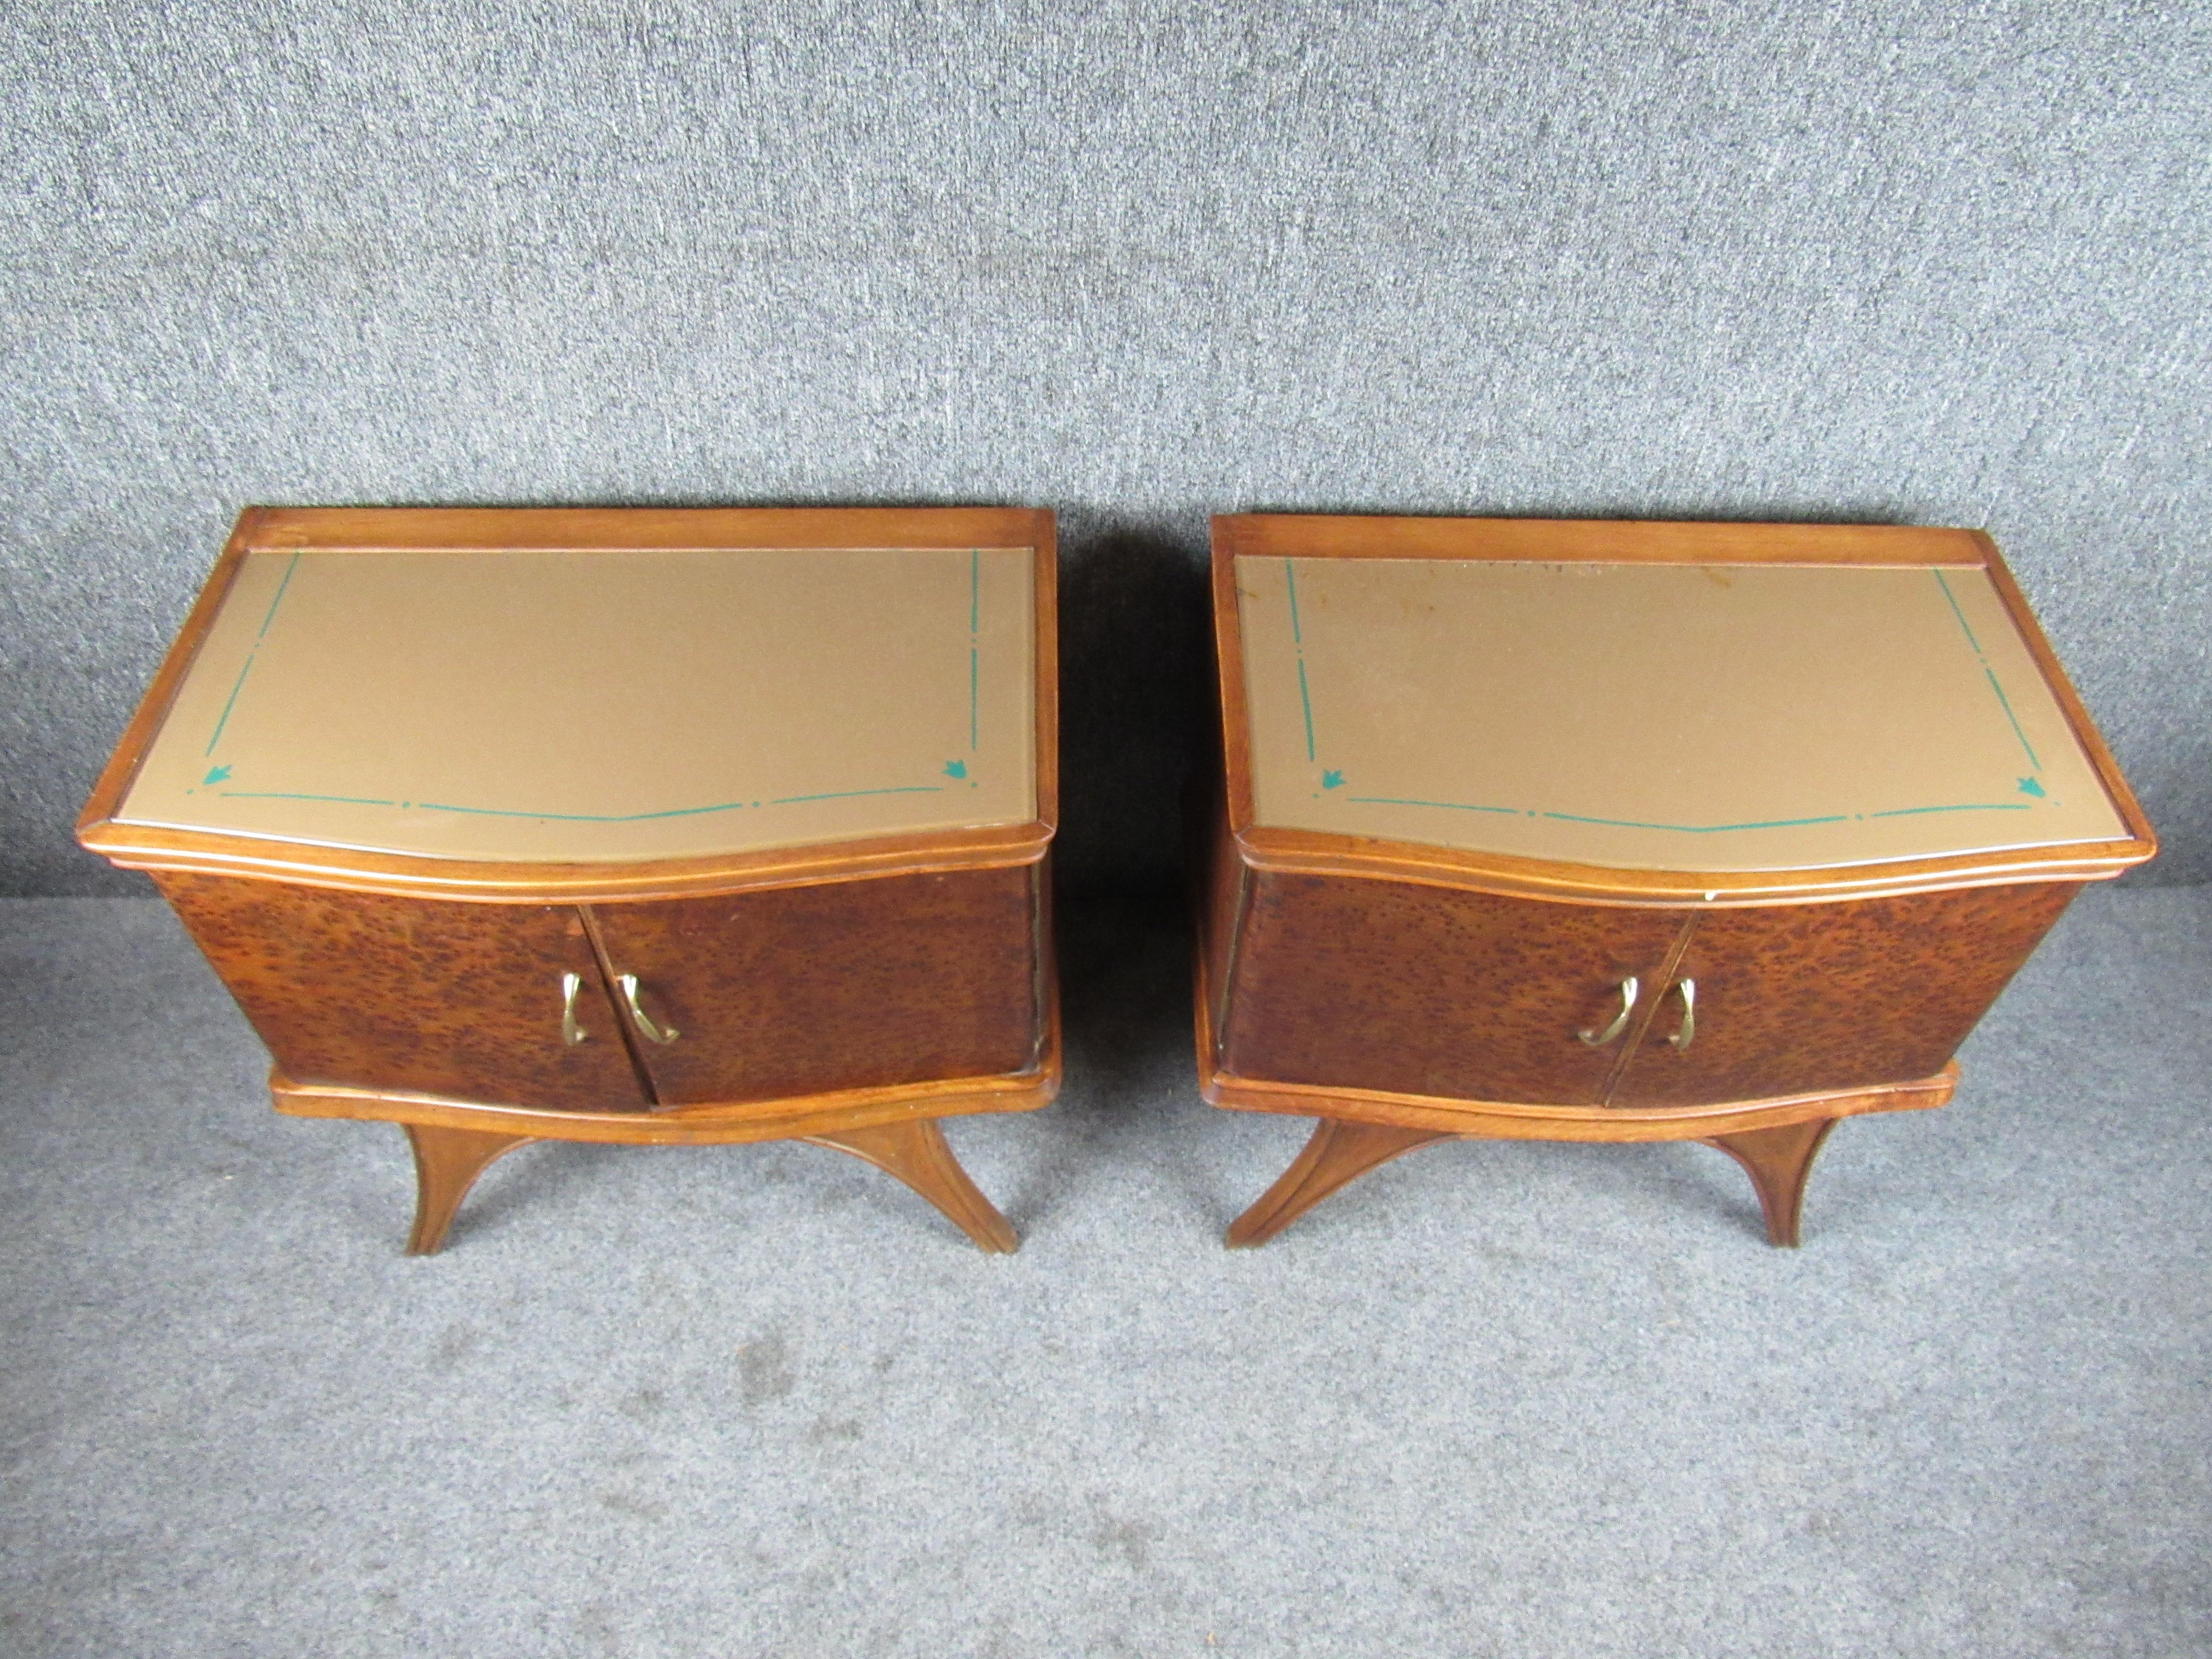 Antique Quilted Birdseye Italian Nightstands In Good Condition For Sale In Brooklyn, NY